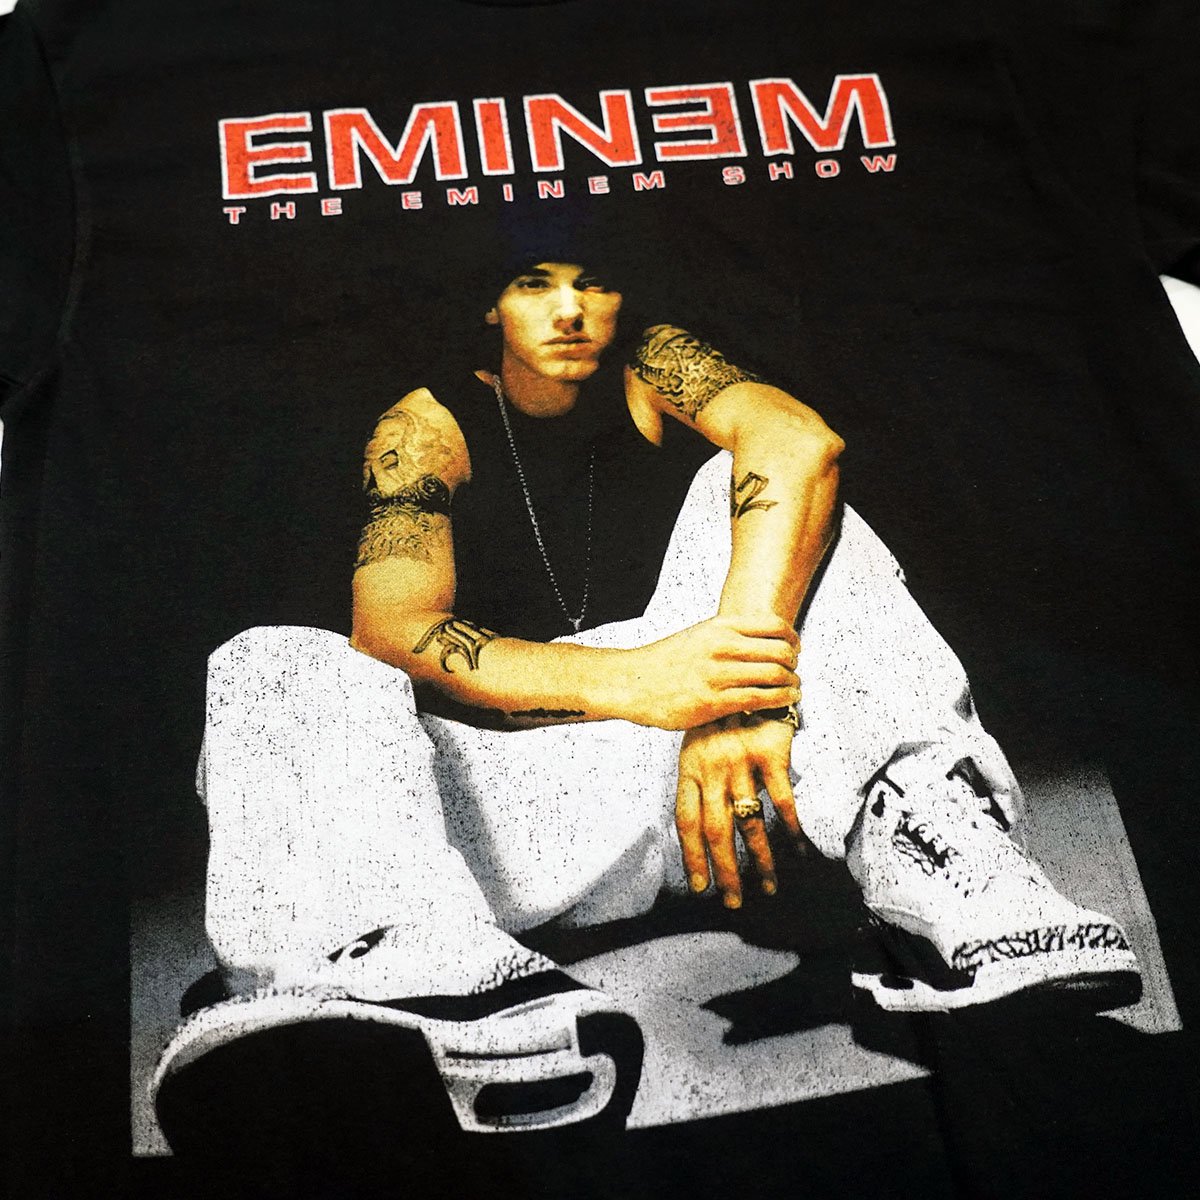 Fedup | HIPHOP WEAR | <img class='new_mark_img1' src='https://img.shop-pro.jp/img/new/icons30.gif' style='border:none;display:inline;margin:0px;padding:0px;width:auto;' />Eminem 